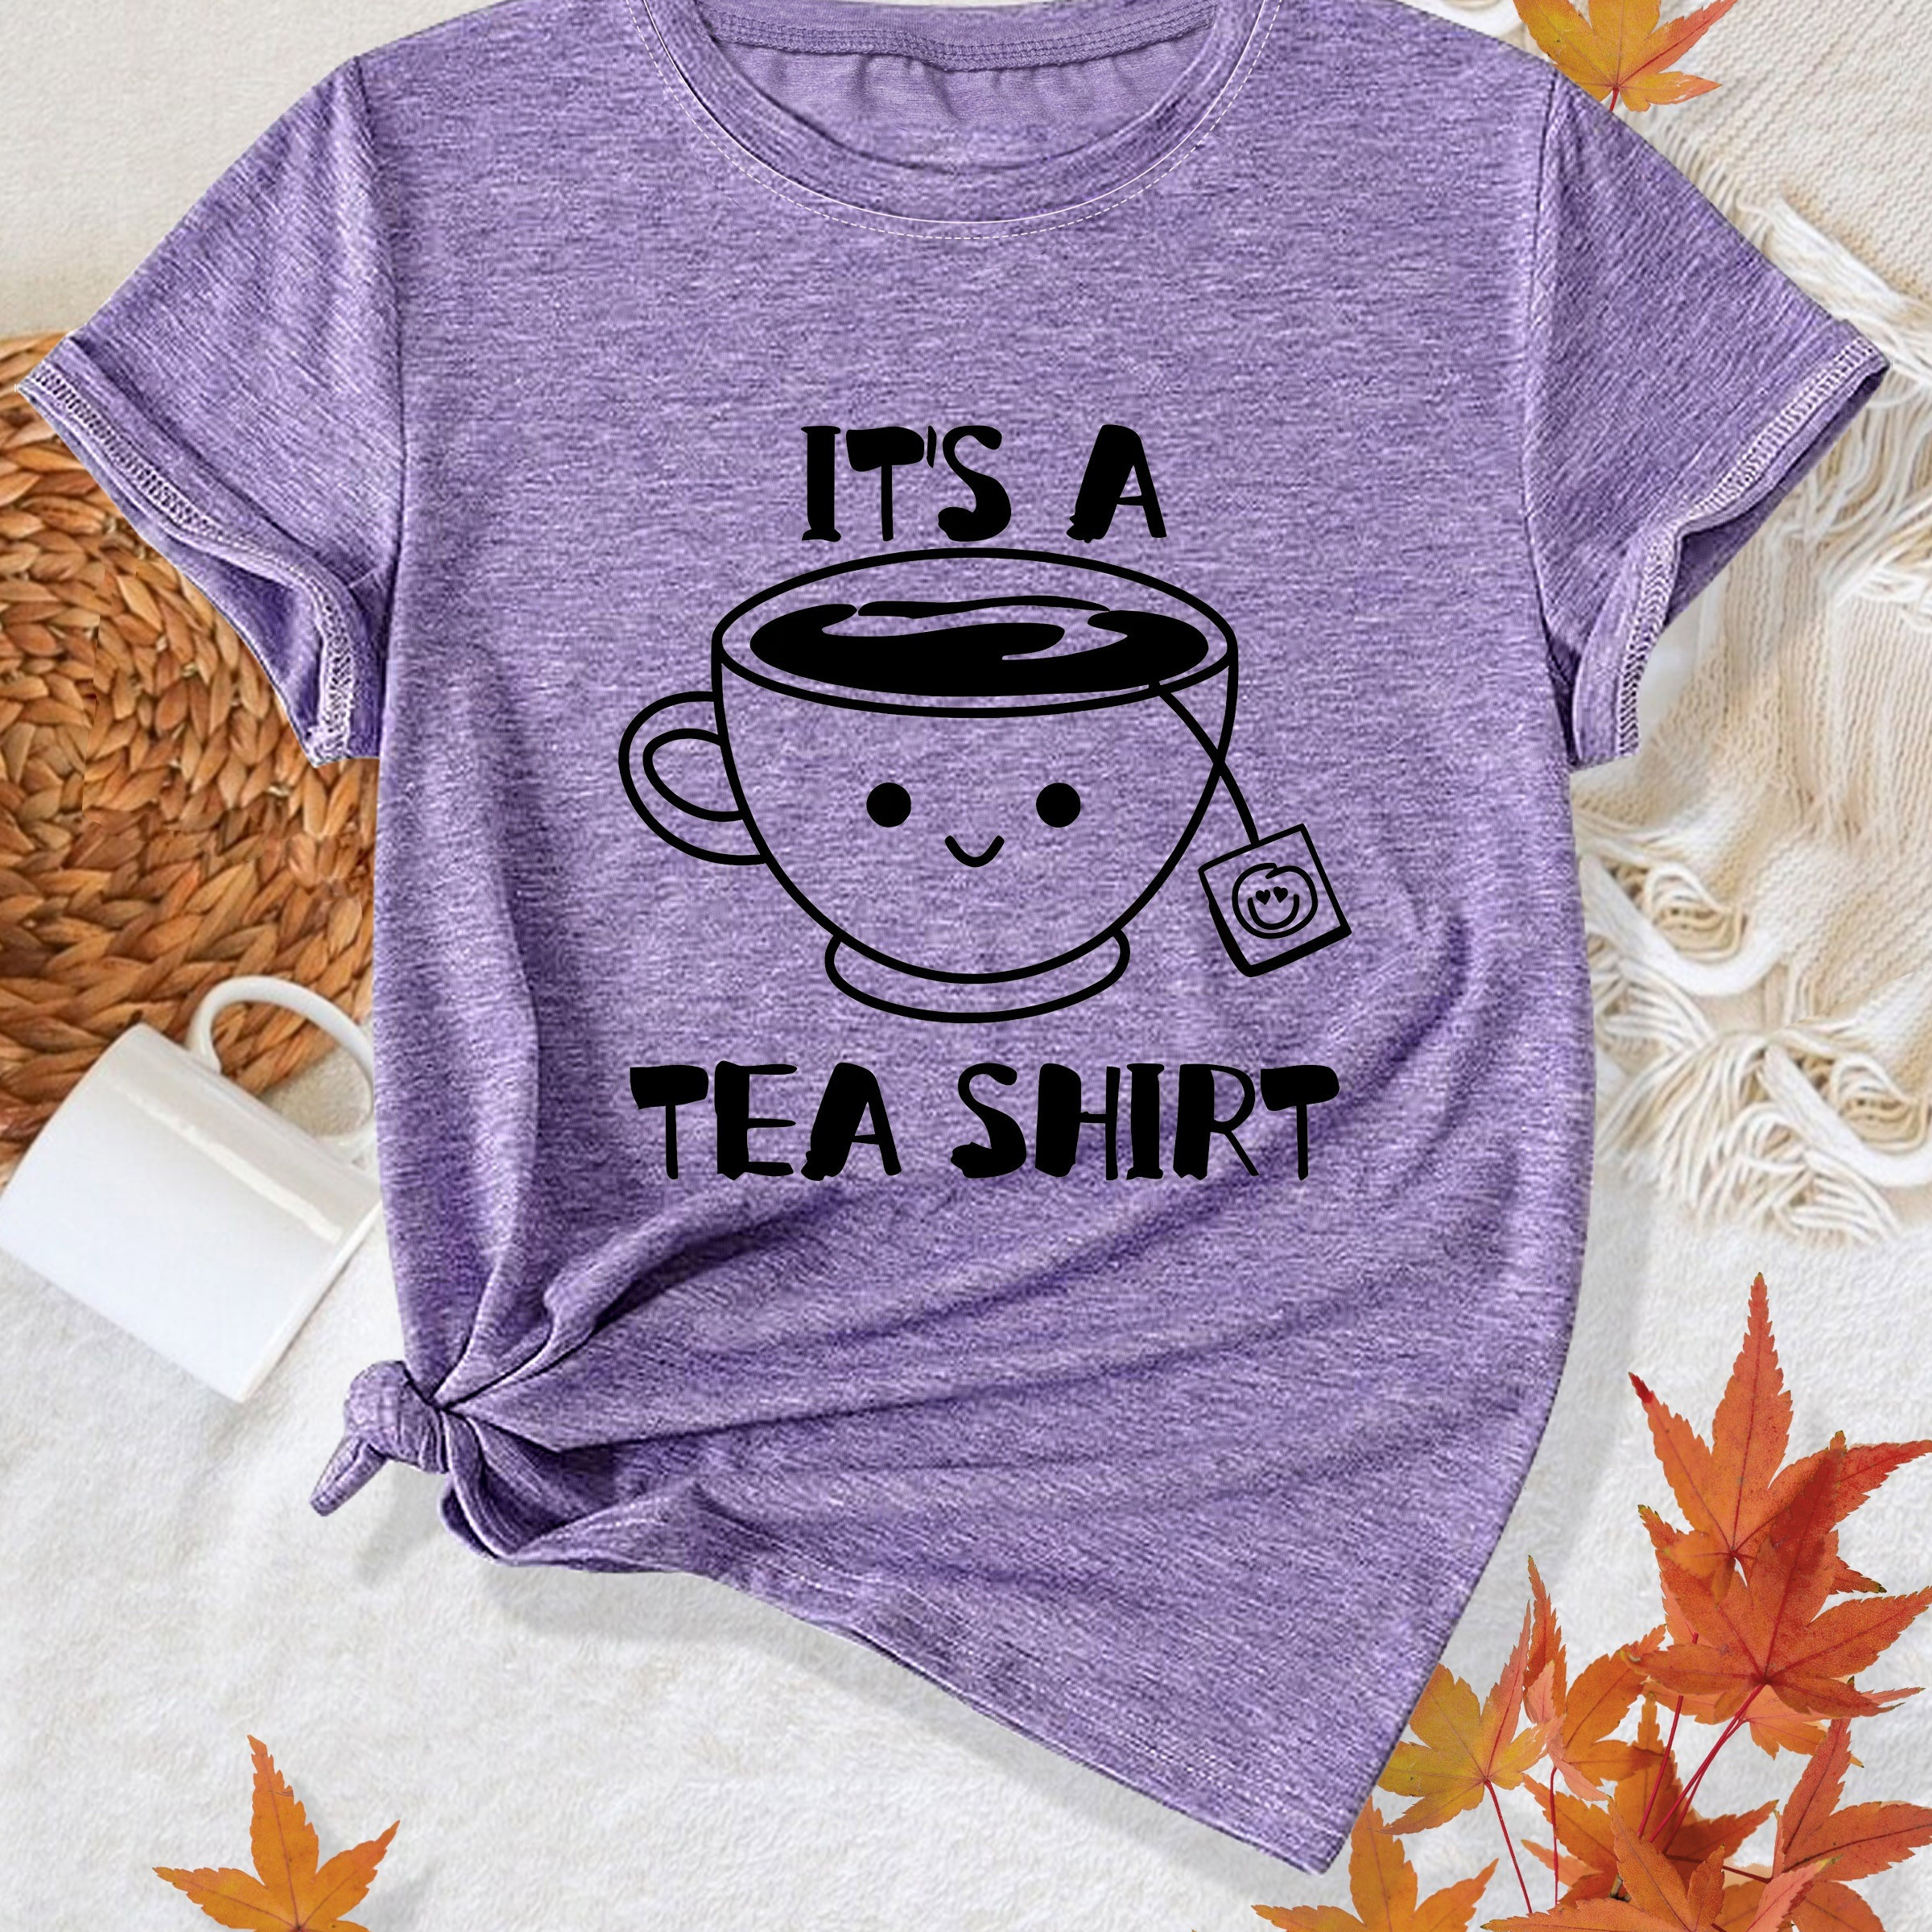 

Women's Casual Round Neck Short-sleeve T-shirt With Smiling Teacup Graphic And "it's A Tea Shirt" Slogan, Fashionable And Elegant Vintage Style Top